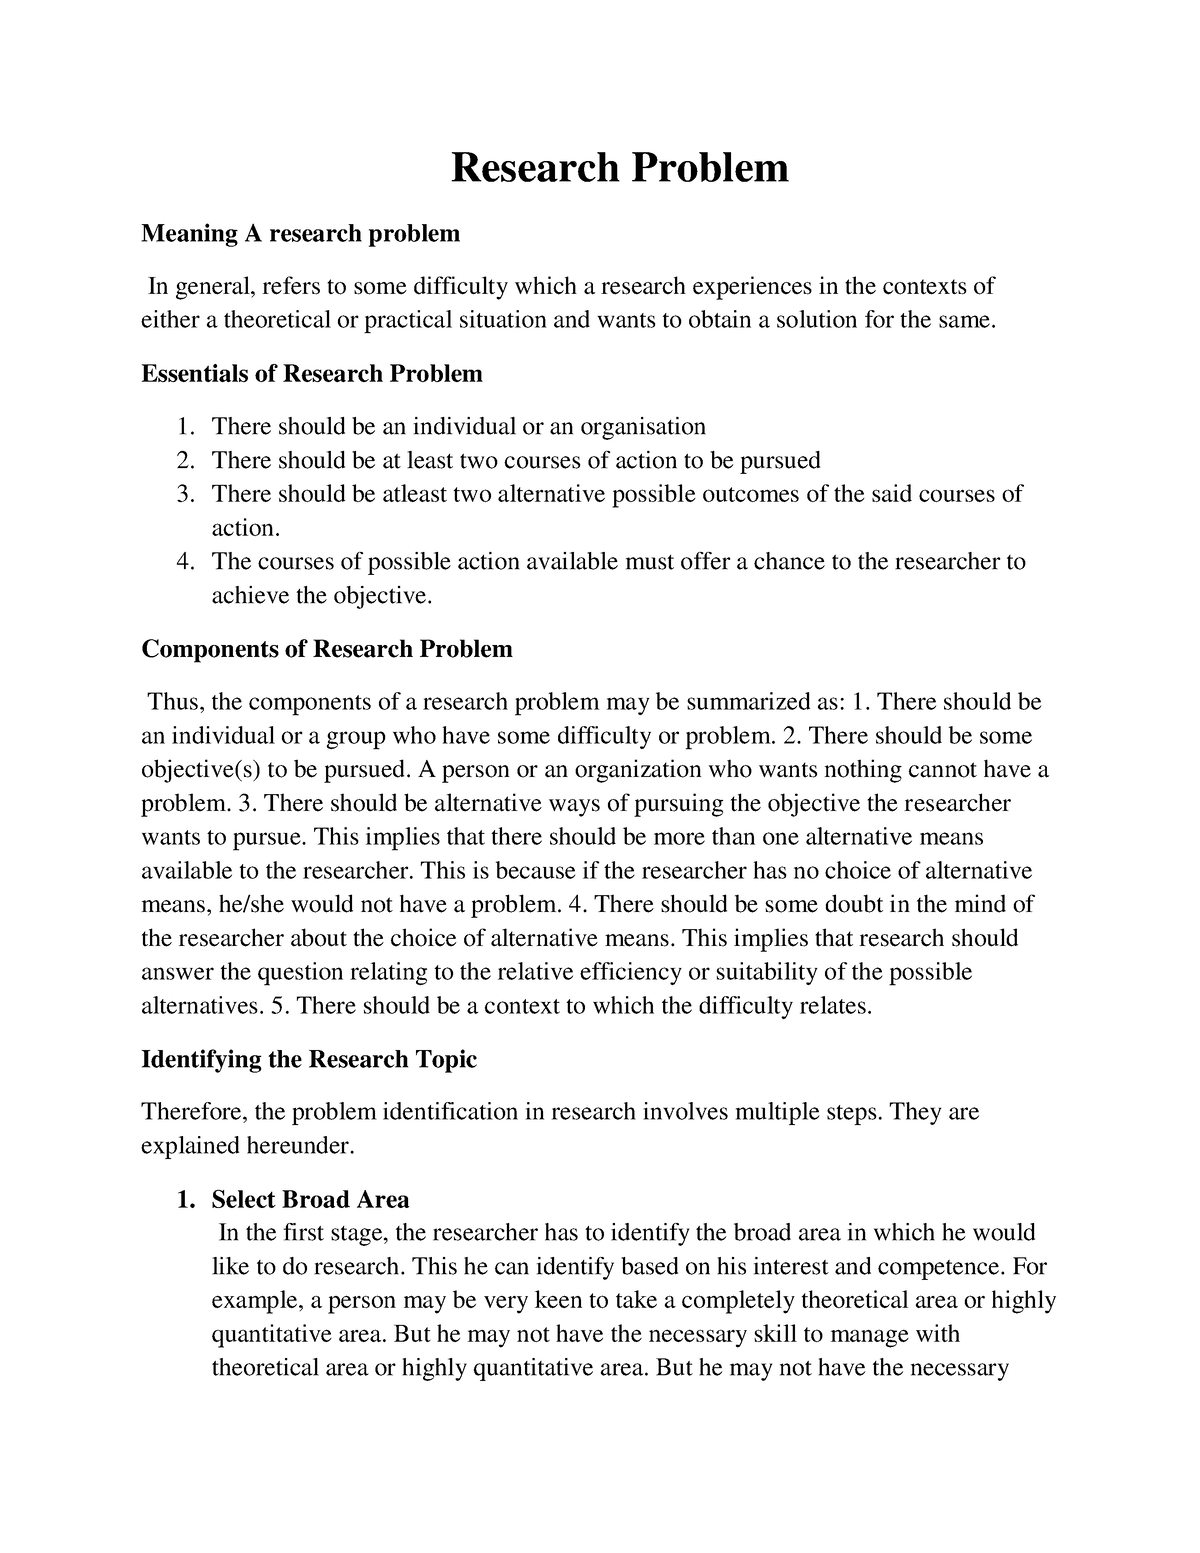 research problem meaning pdf